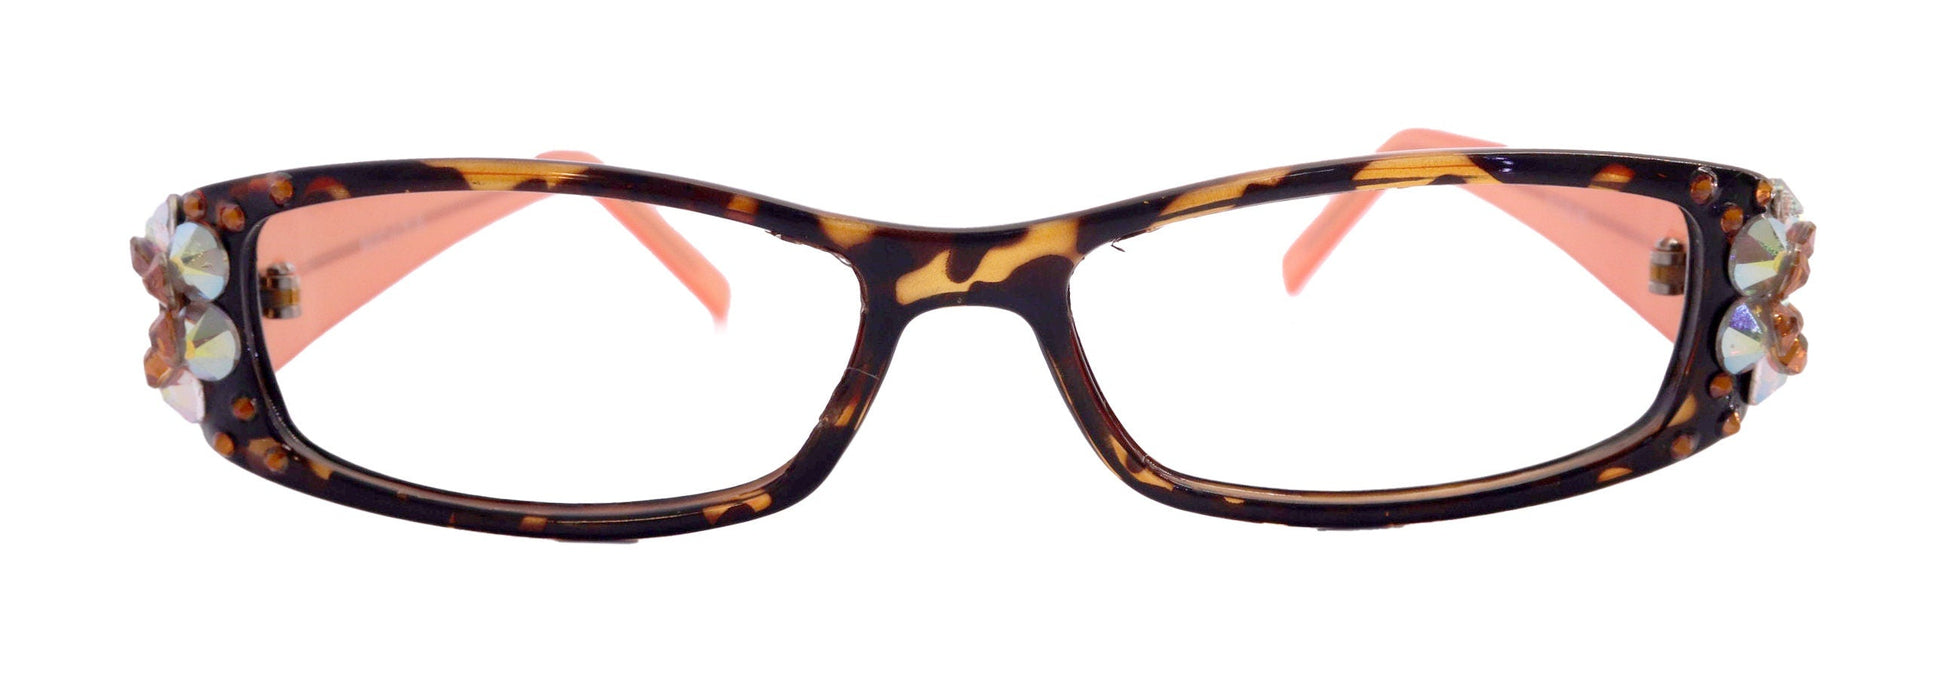 All Favorite, (Bling) Reading Glasses Women Adorned W European Crystals  (Tortoise Brown) Frame +4 +4.5 +5 +6 NY Fifth Avenue.